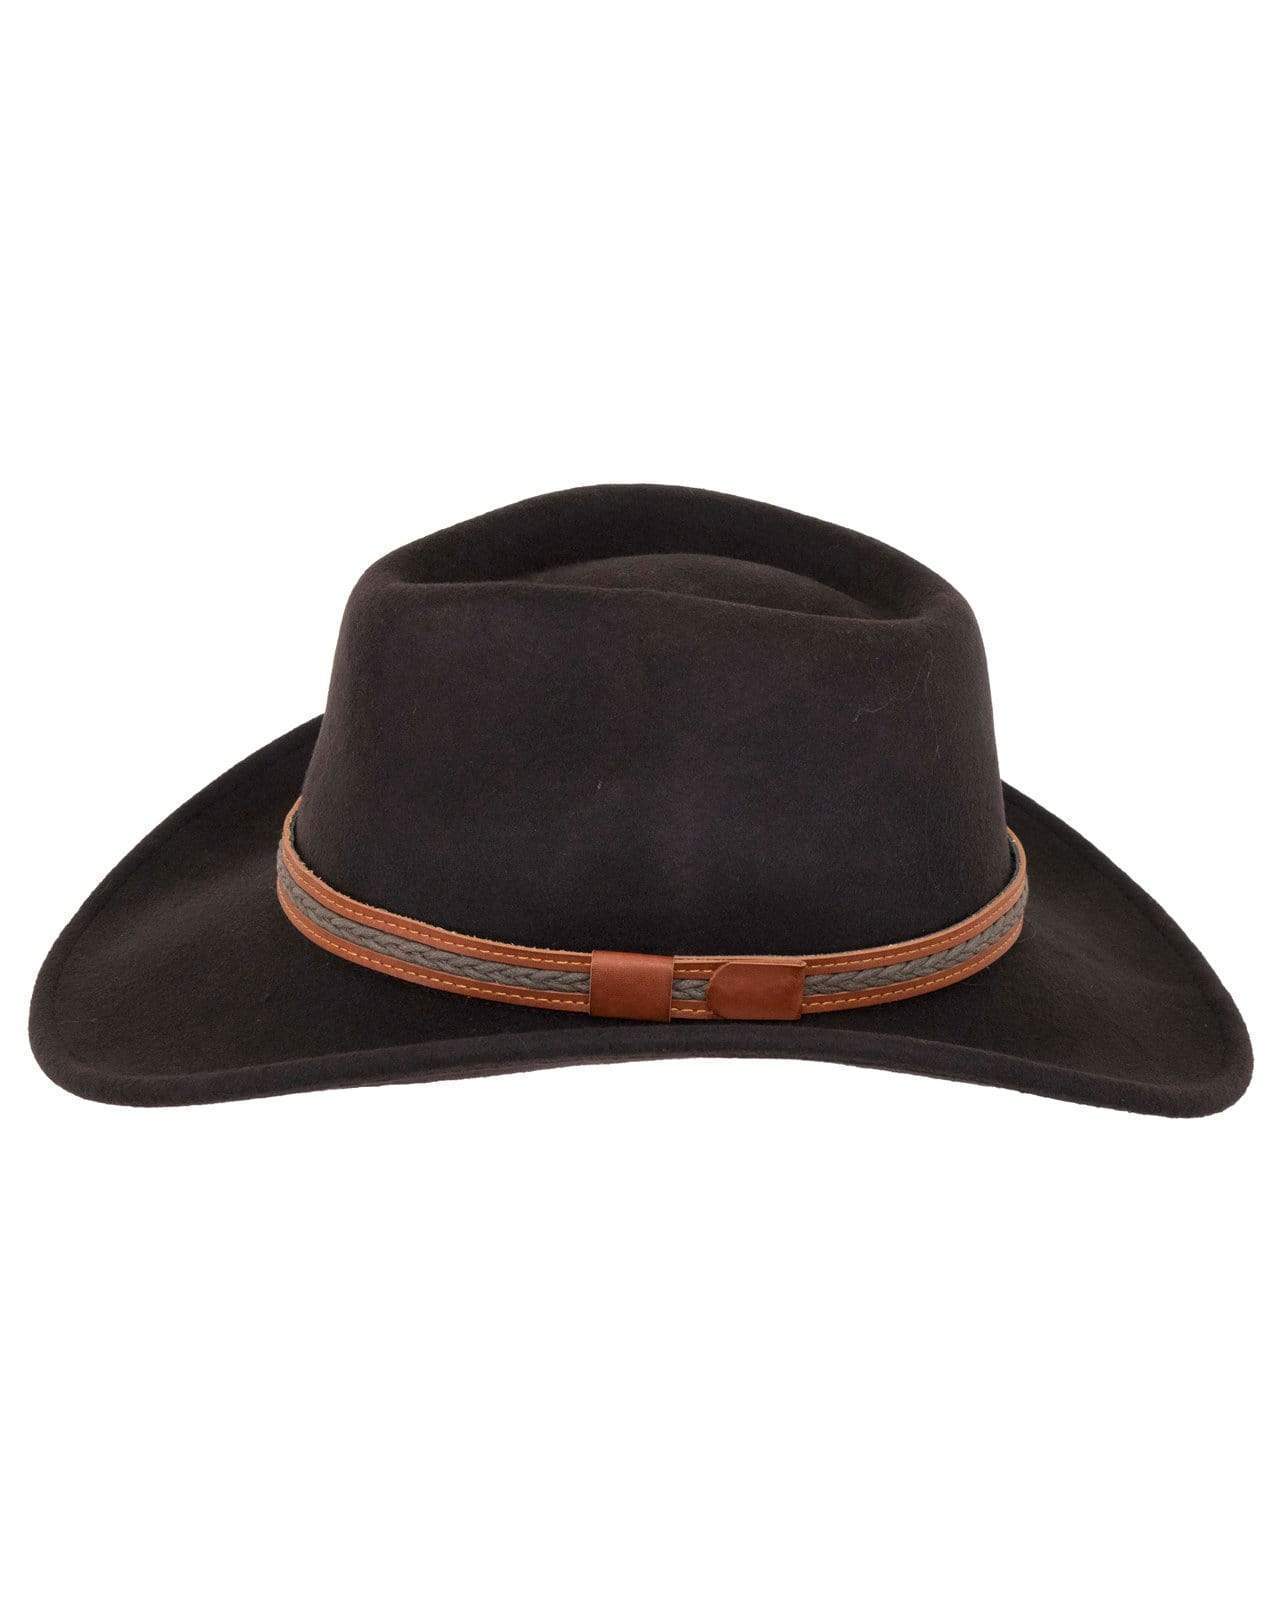 Outback Trading Company High Country Hats